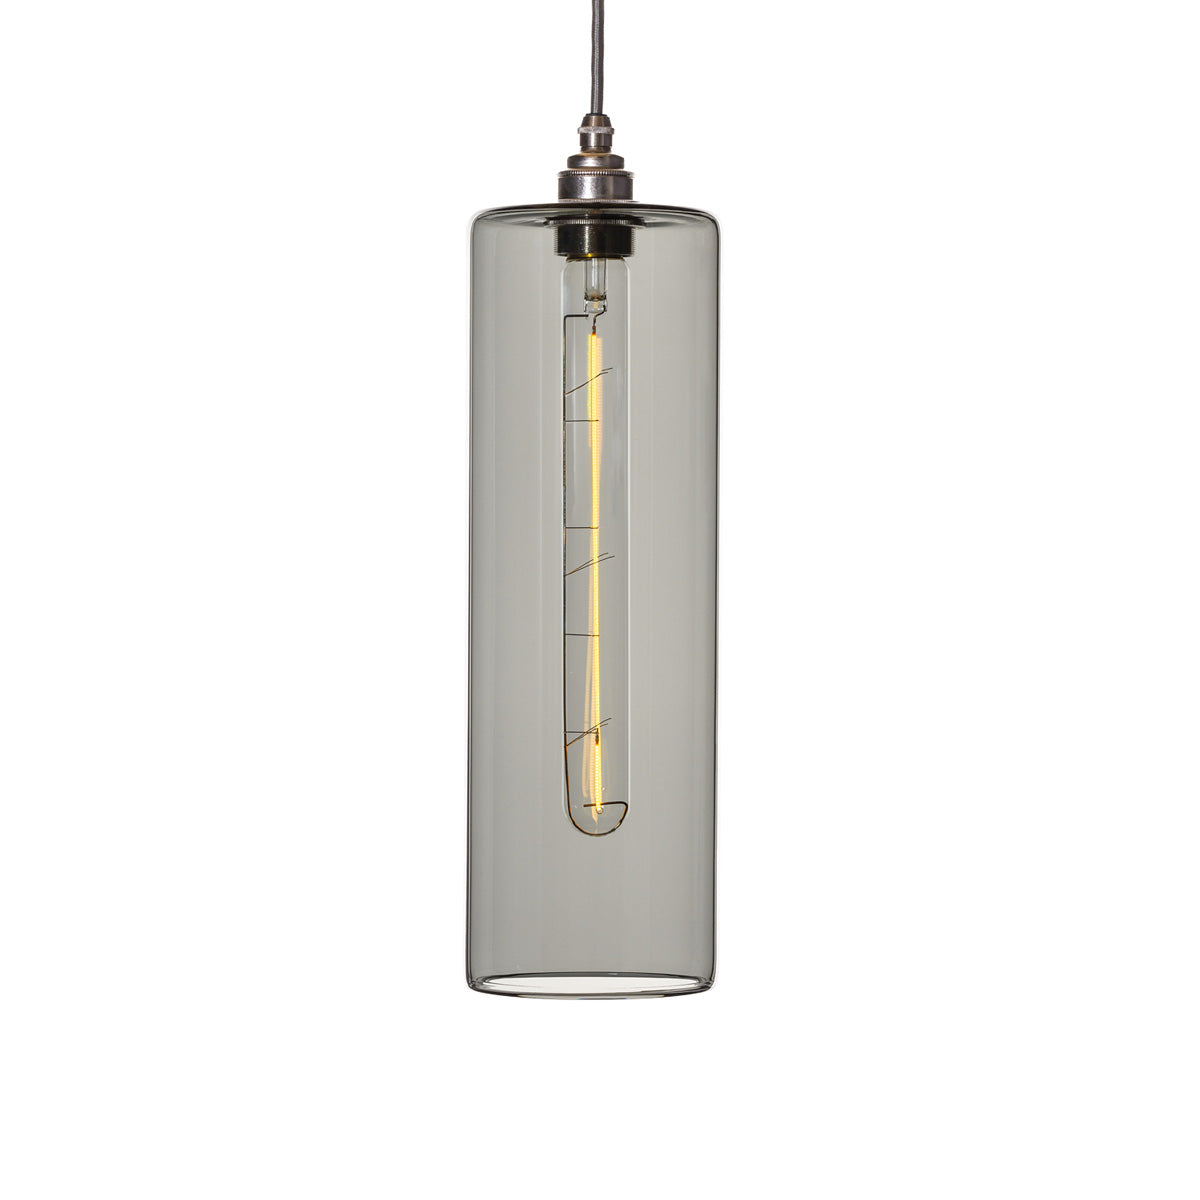 Leverint's Piccadilly hand-blown pendant light with transparent black glass